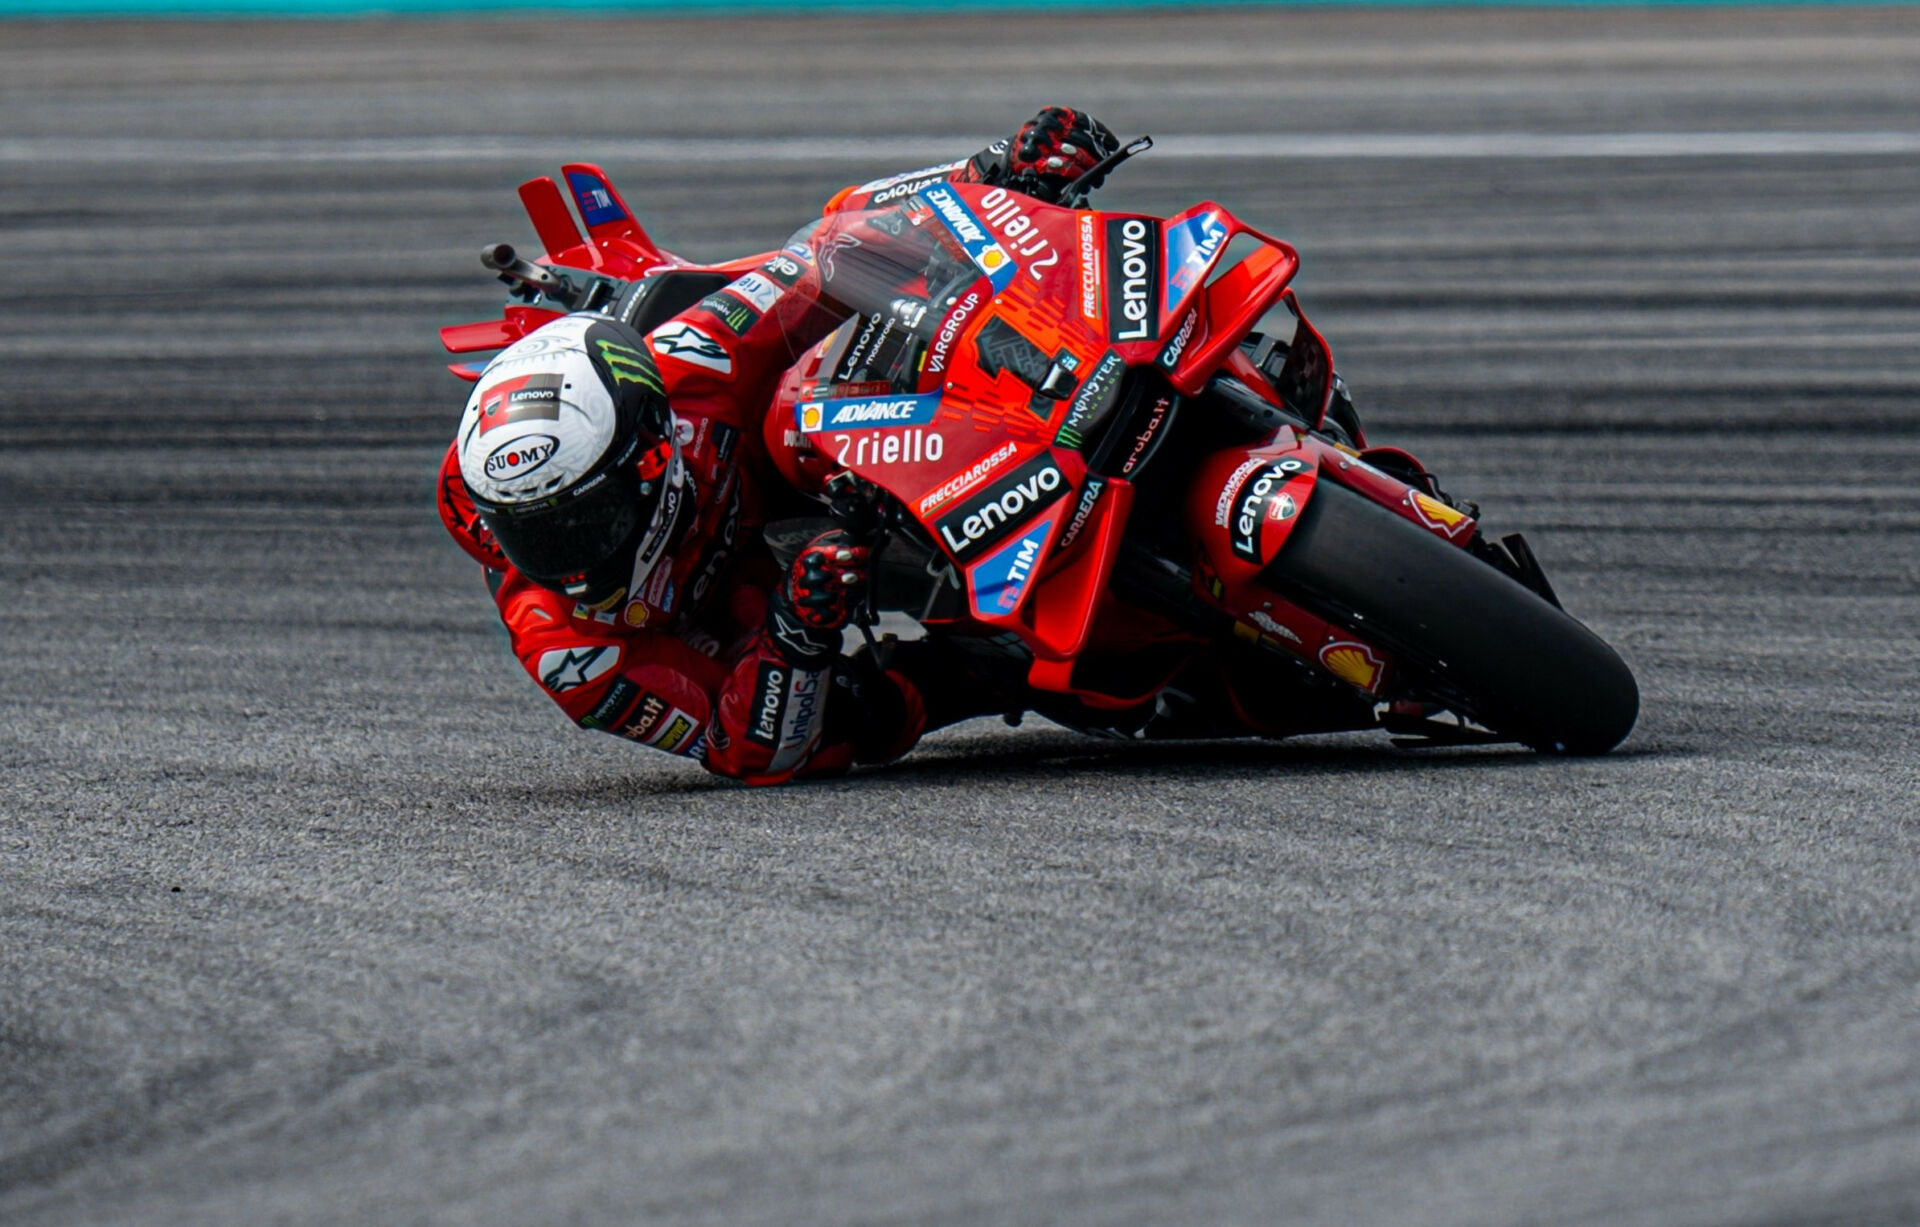 Two-time and defending MotoGP World Champion Francesco Bagnaia (1) was quickest during testing at Sepang. Photo courtesy Ducati.